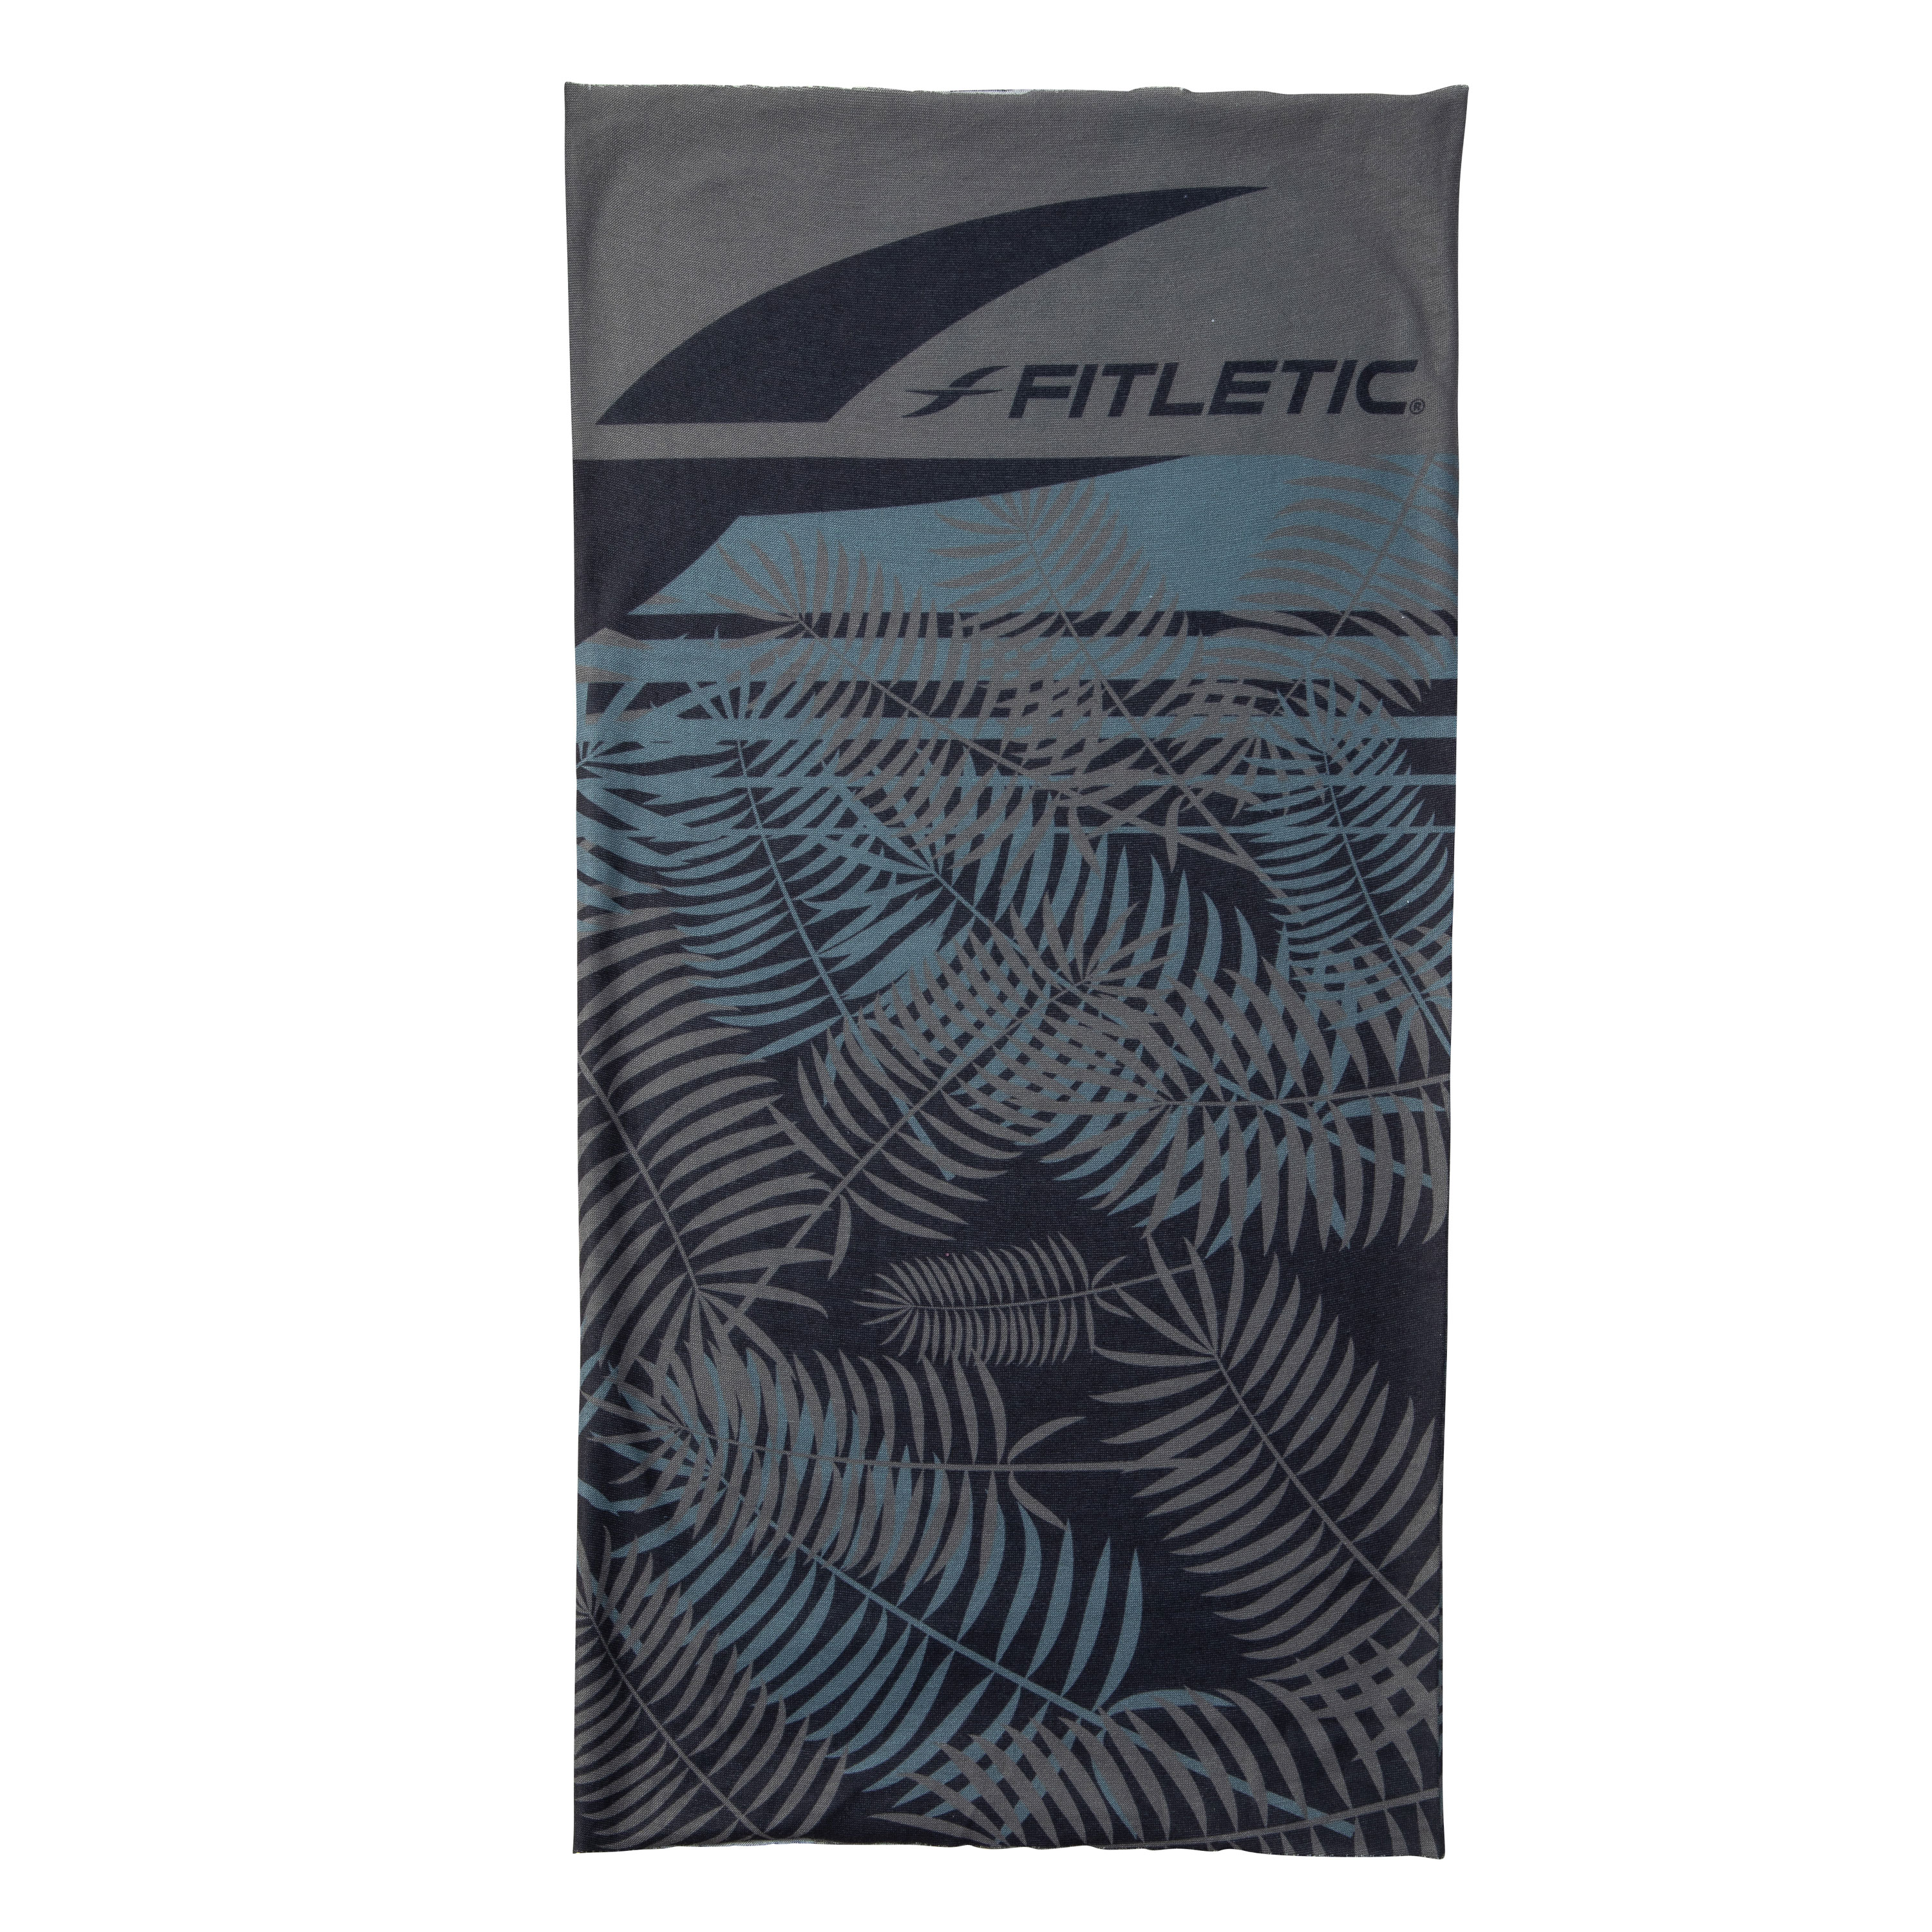 FITLETIC Multi Scarf